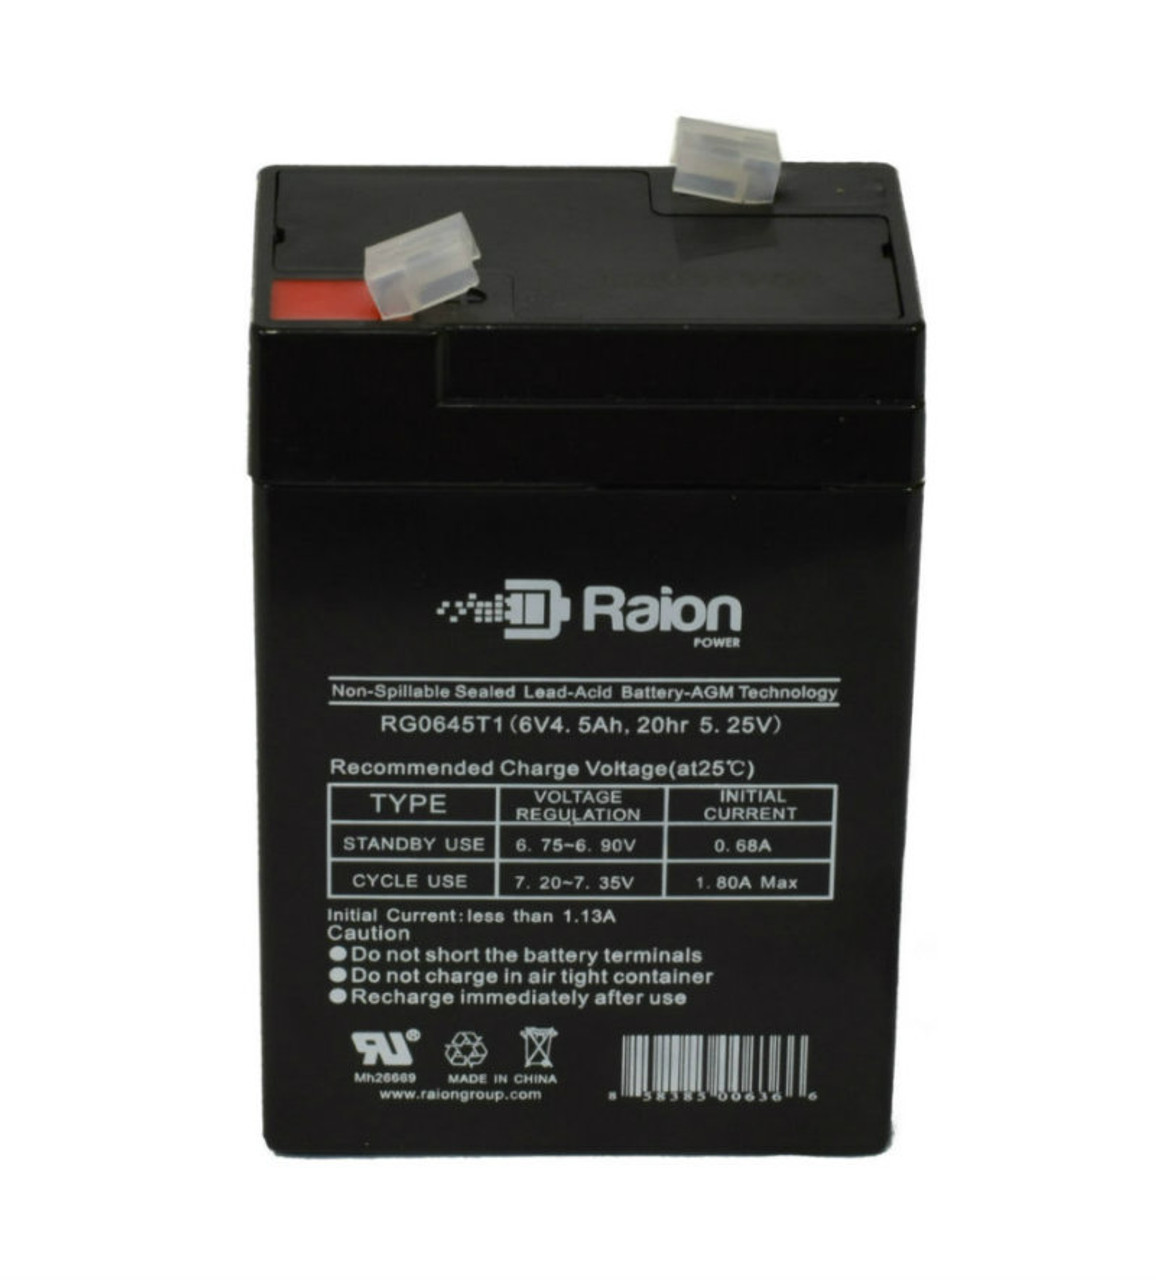 Raion Power RG0645T1 Replacement Battery Cartridge for Criticare Systems Pulse Oximeter 50445